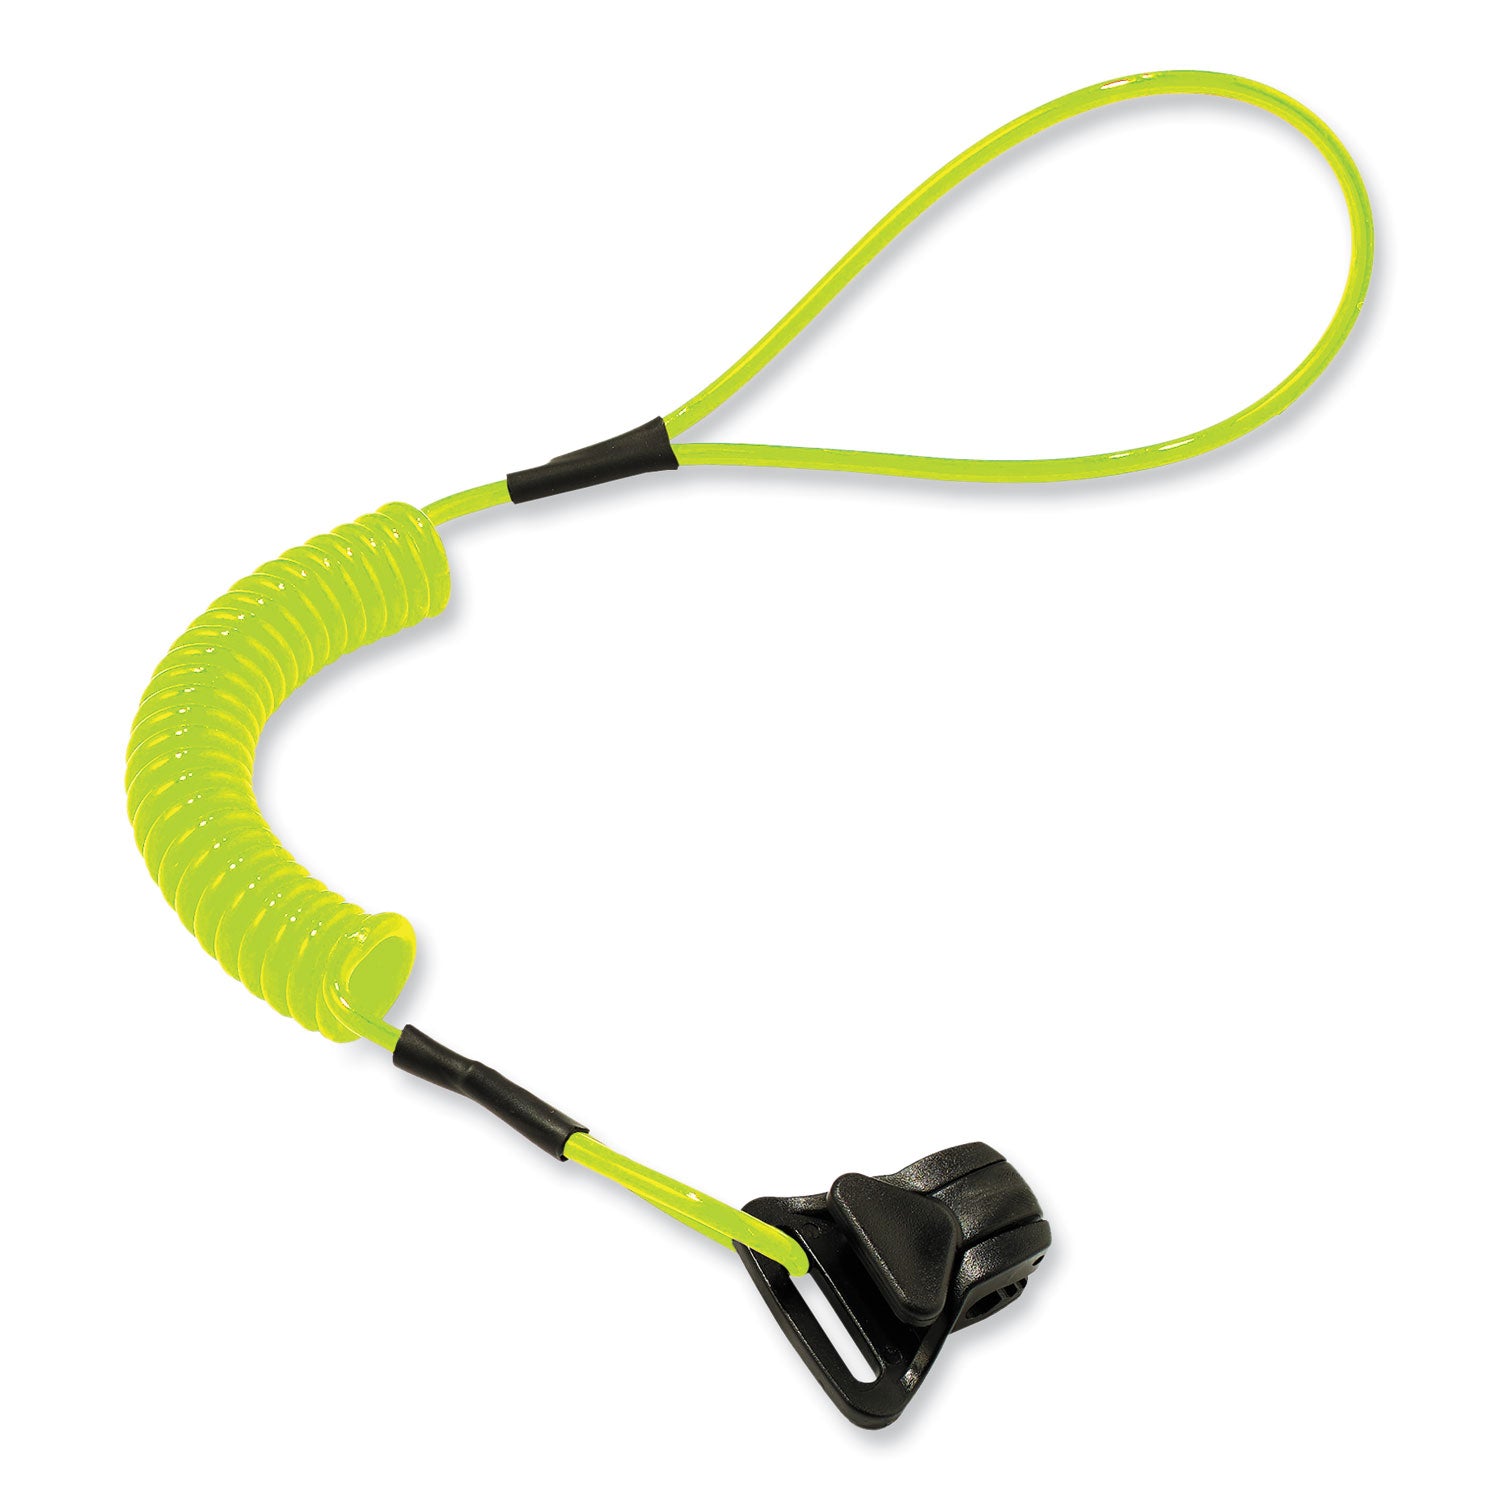 squids-3158-coiled-lanyard-with-clamp-2-lb-max-working-capacity-12-to-48-long-lime-ships-in-1-3-business-days_ego19159 - 1